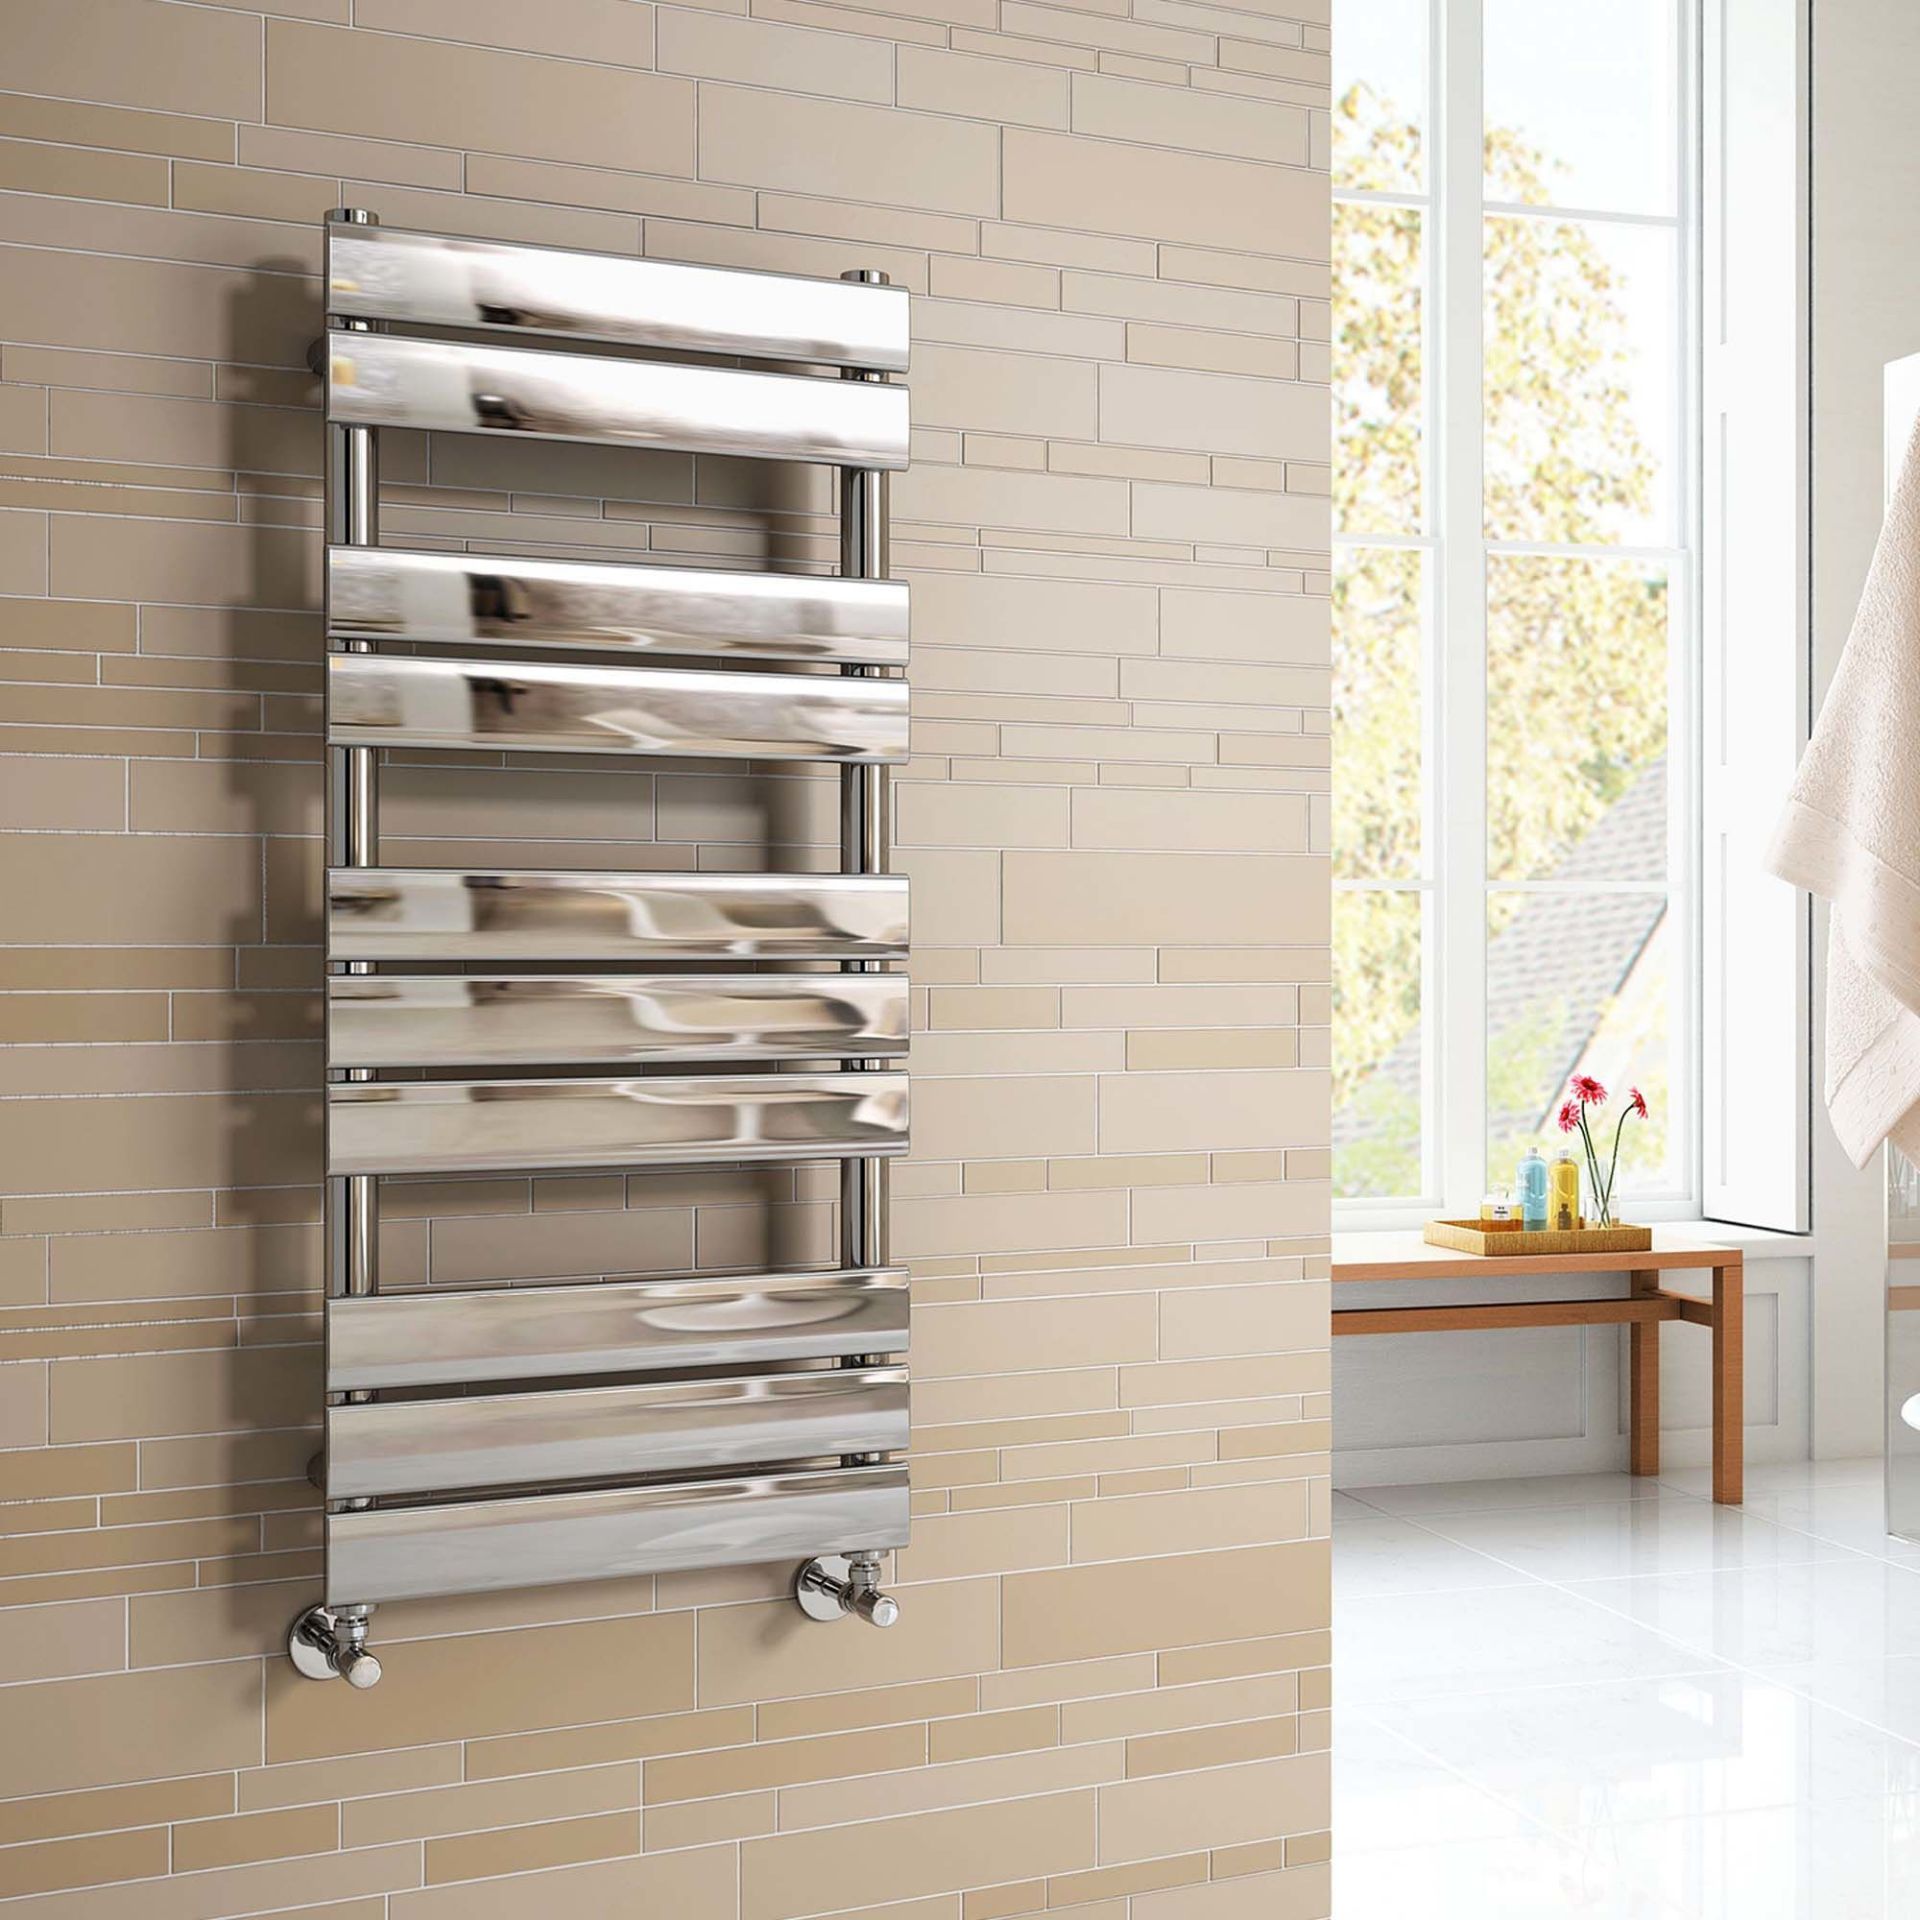 (LL119) 700x400mm Chrome Flat Panel Ladder Towel Radiator. RRP £229.99. We use low carbon steel of